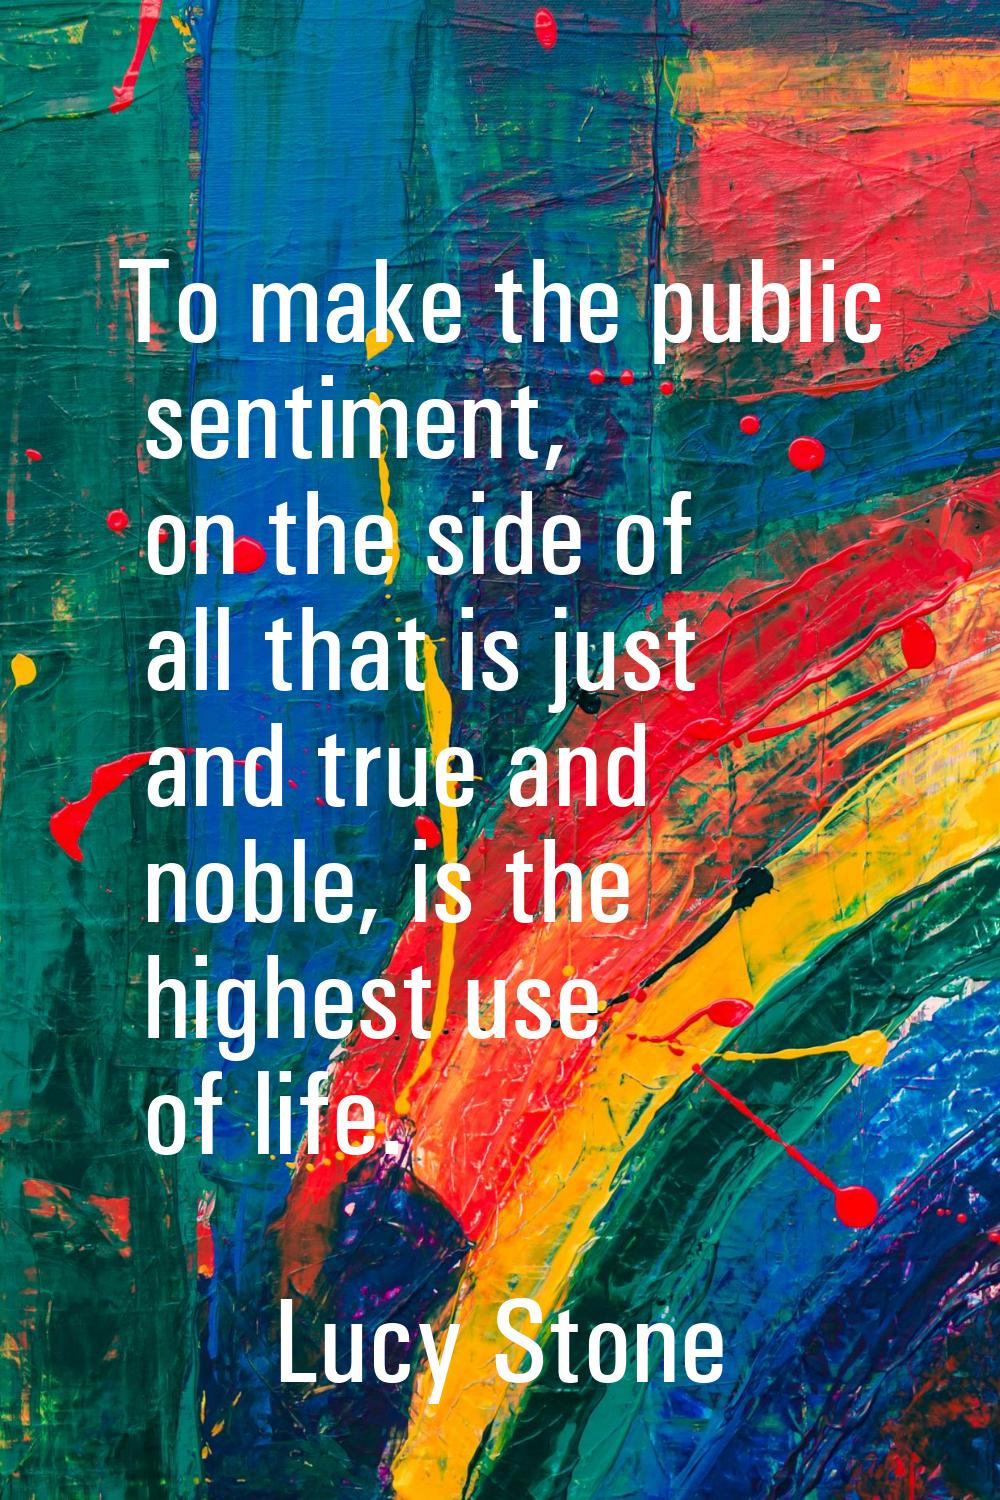 To make the public sentiment, on the side of all that is just and true and noble, is the highest us